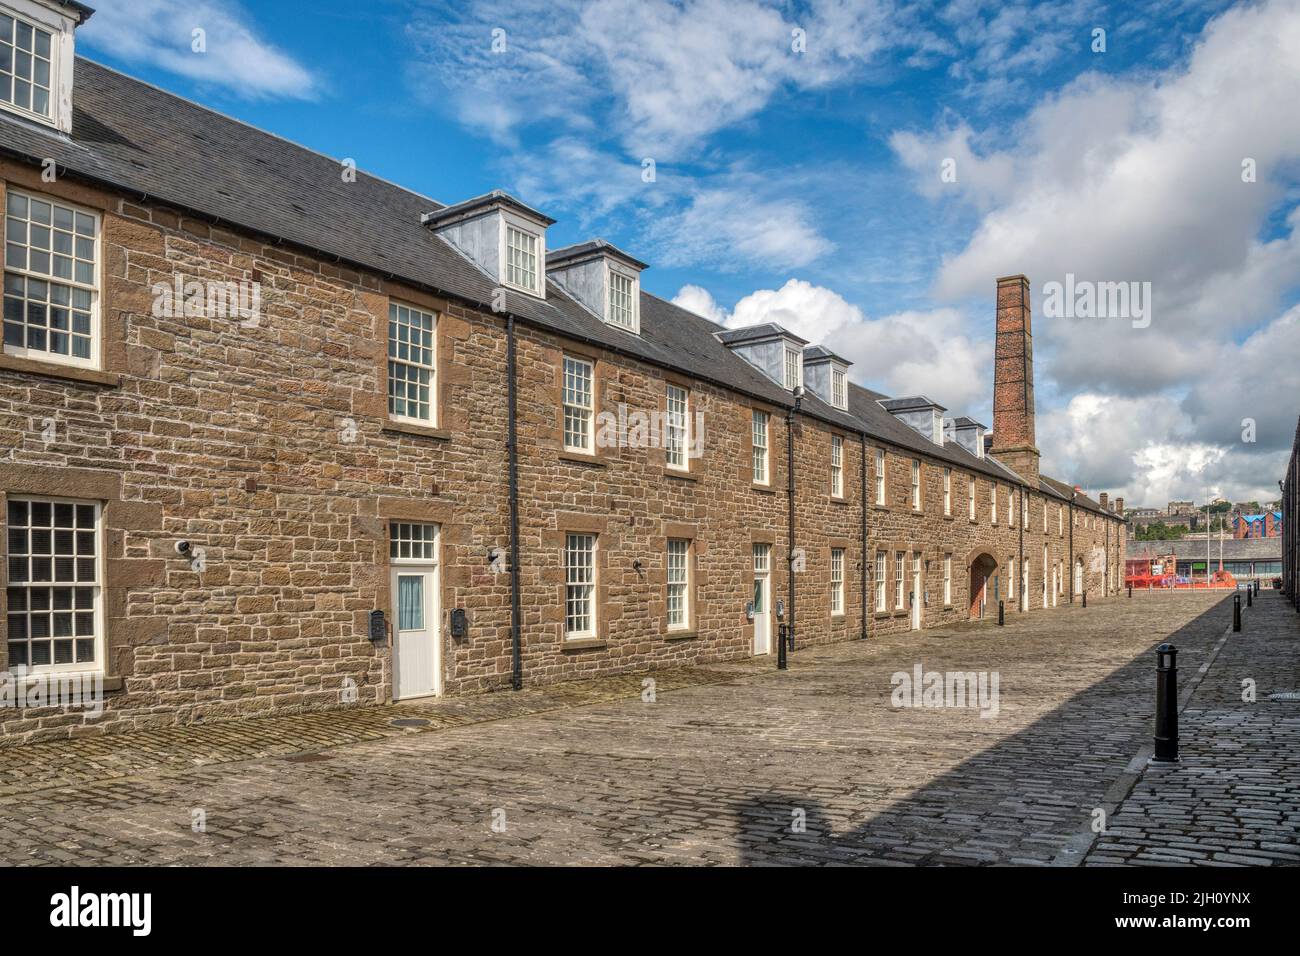 Chandlers Lane, Dundee contains homes converted from the former harbour workshops dating back to 1837. The chimney marks the original blacksmiths. Stock Photo